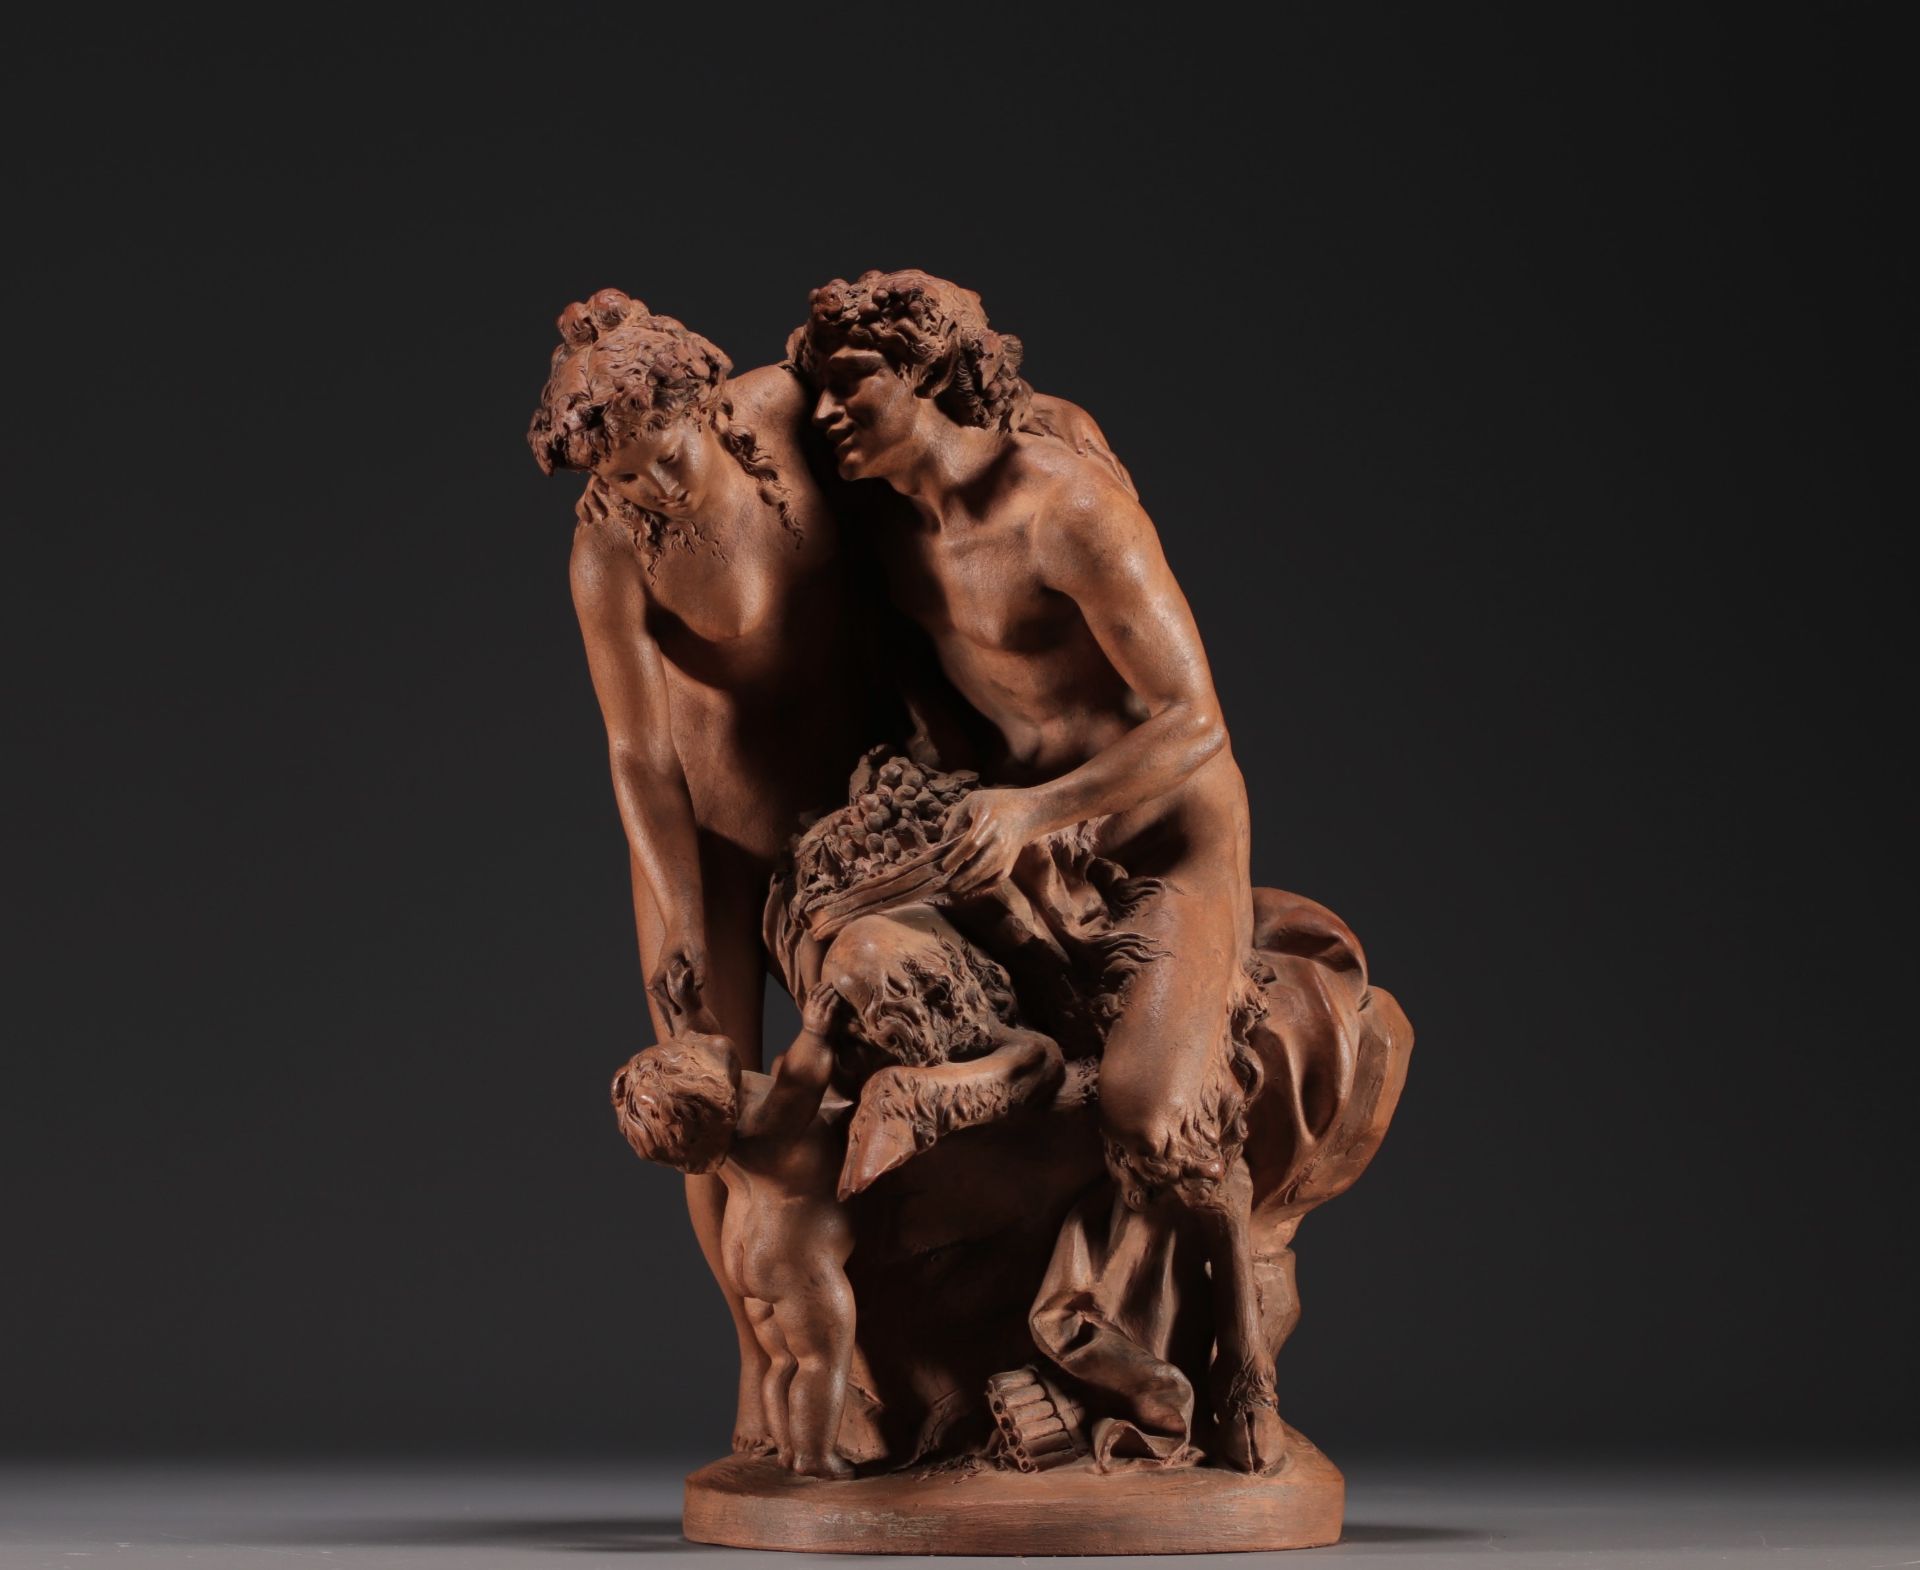 Claude Michel CLODION (1738-1814) after, "Nymph and Faun", terracotta sculpture. - Image 2 of 5